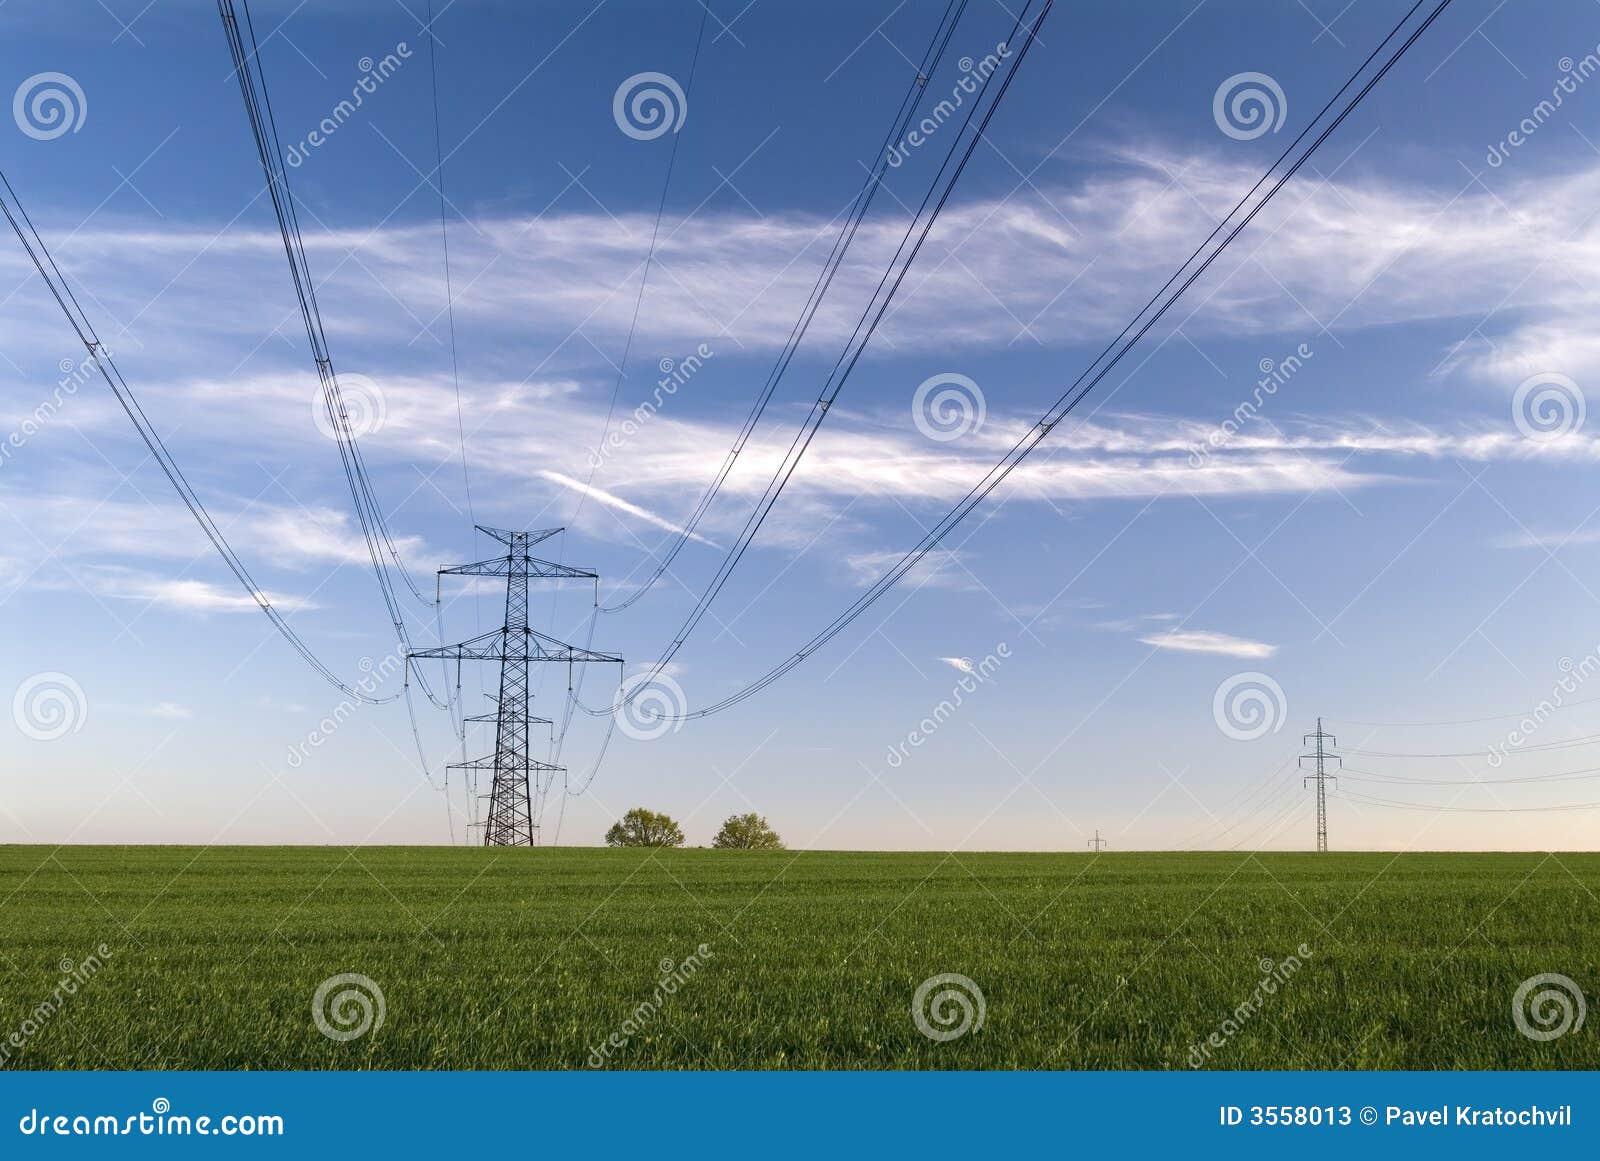 electric pole stock image image technology field 3558013